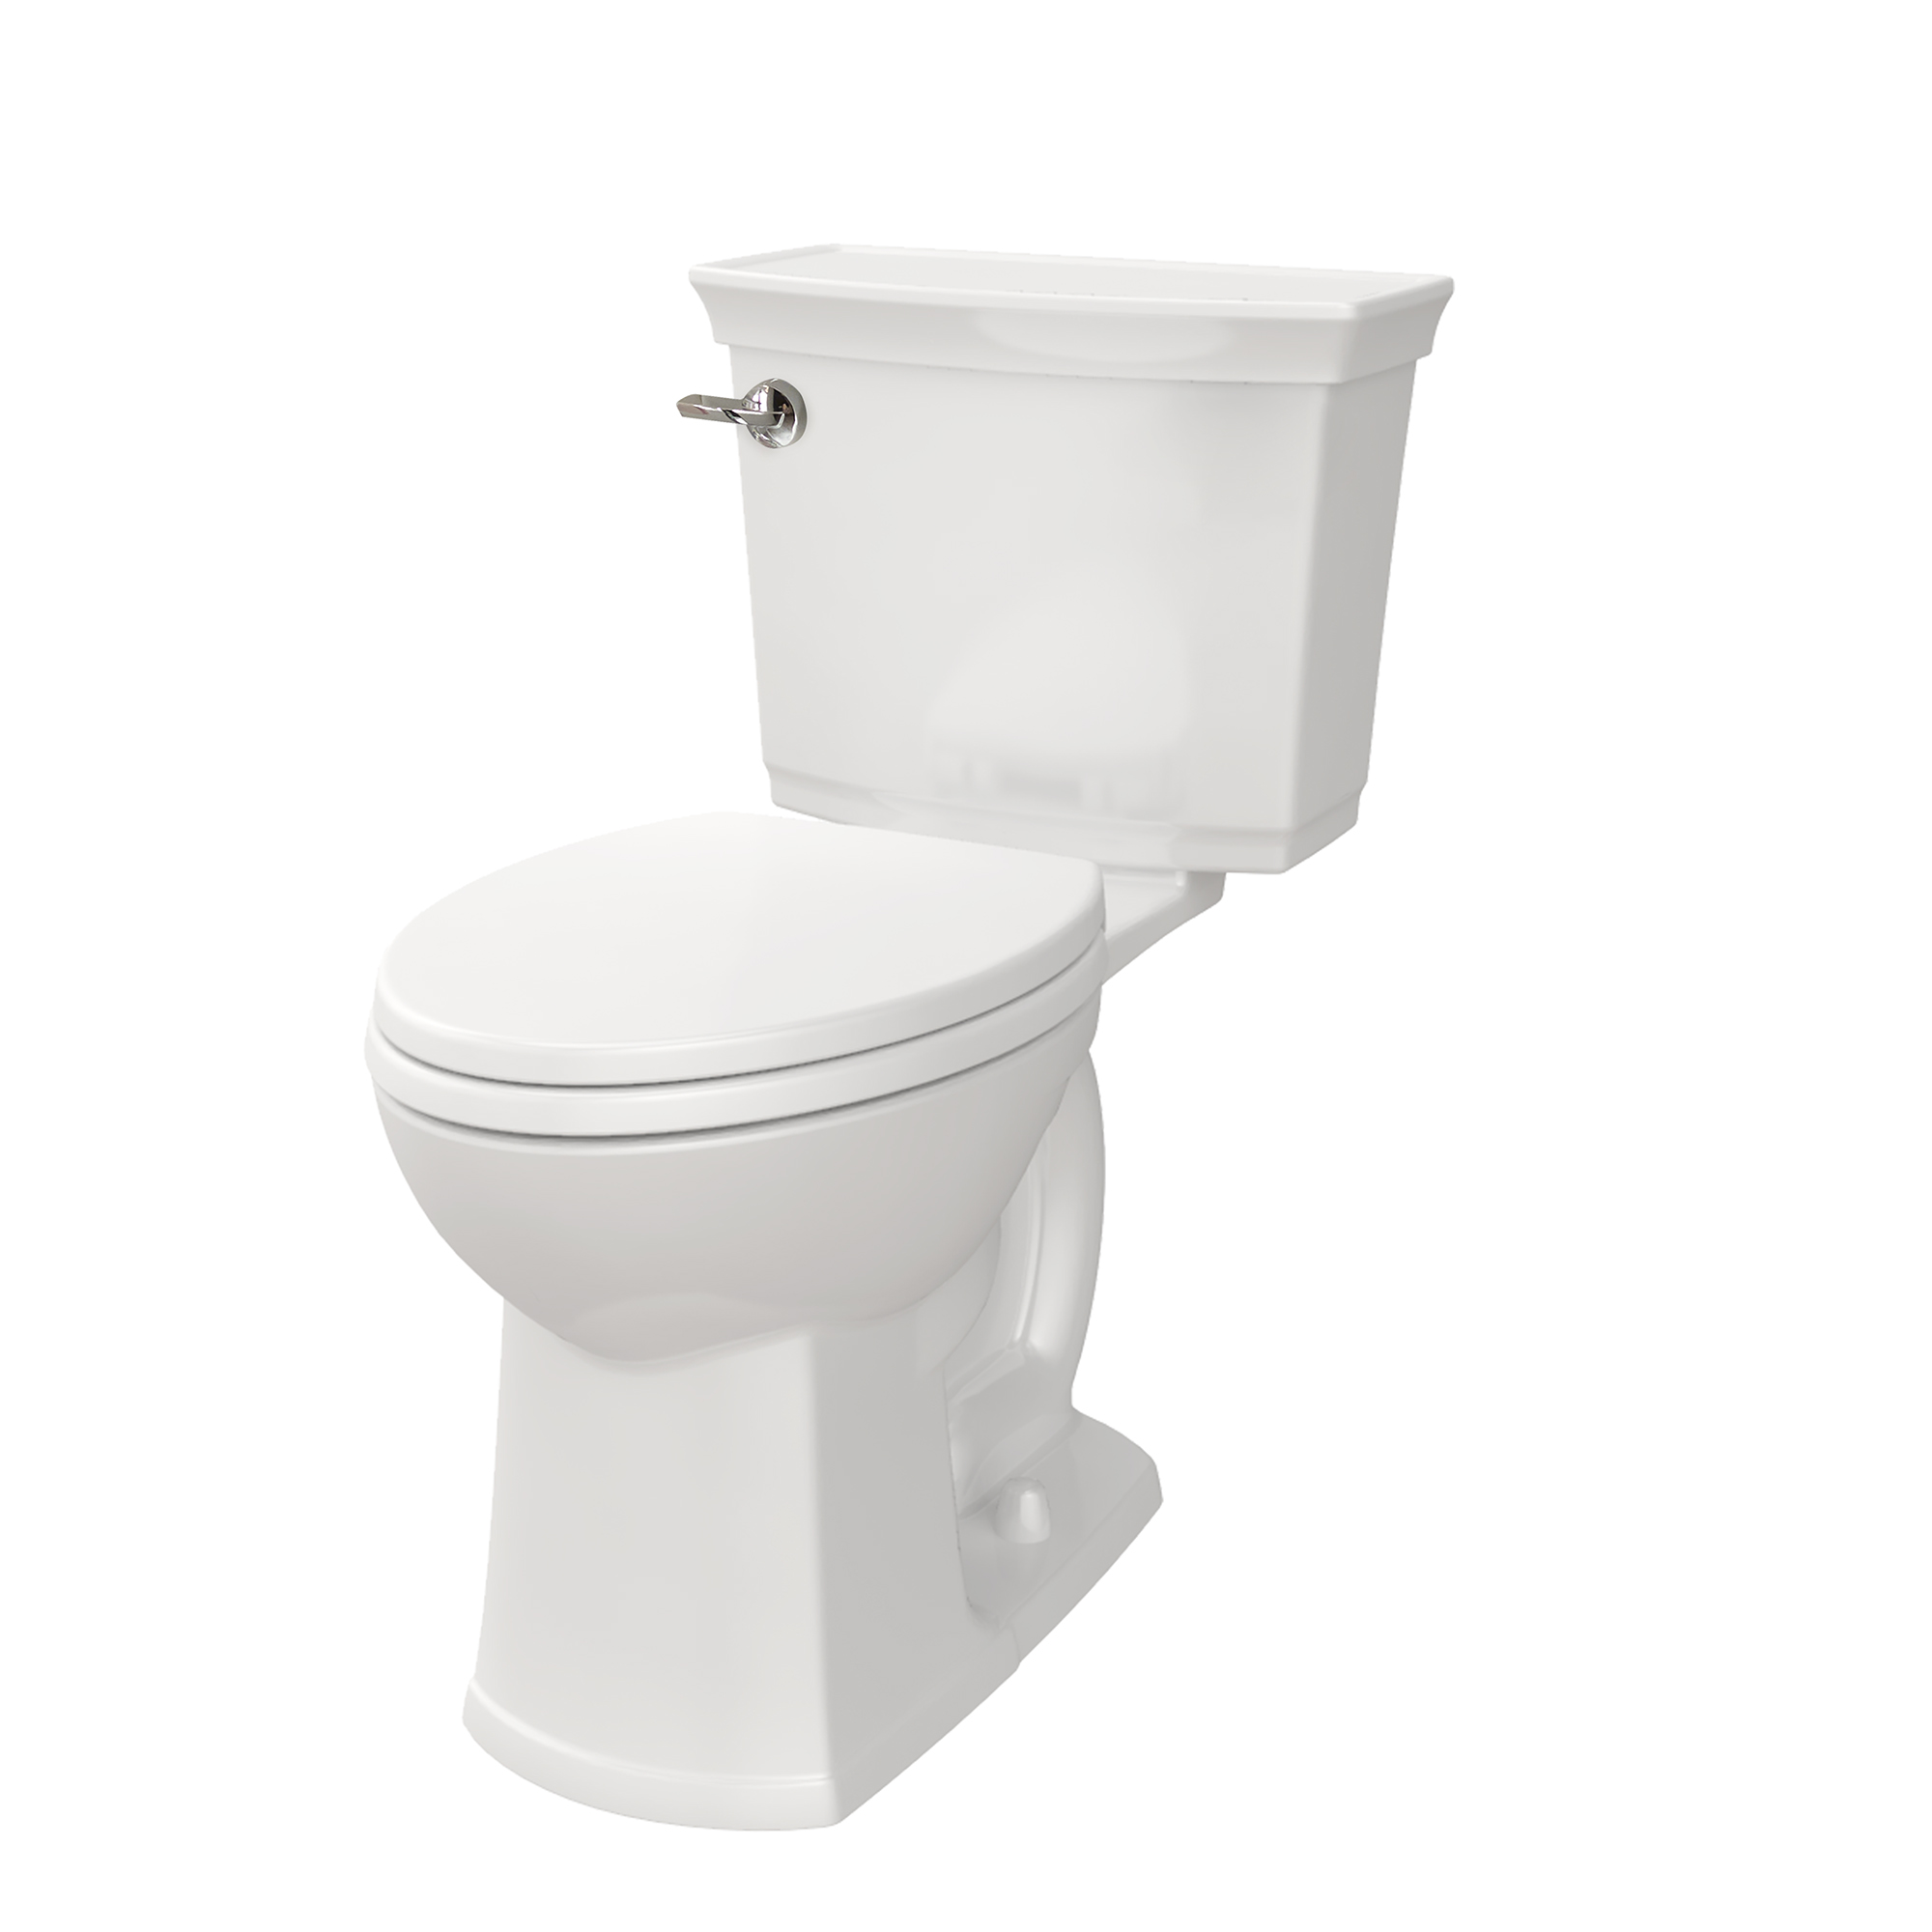 Wyatt® Chair-Height Elongated Toilet Bowl with Seat